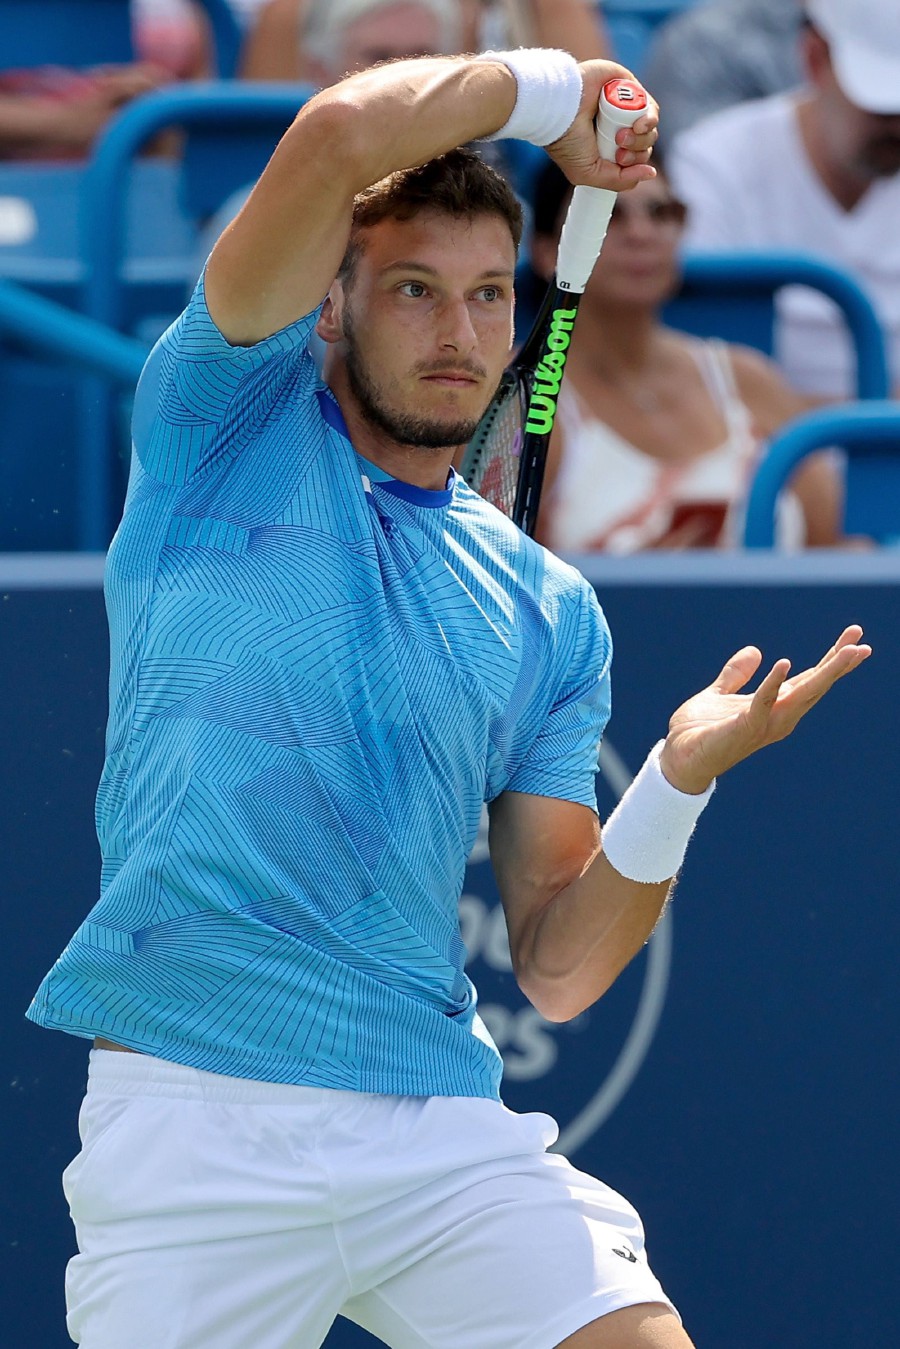 Pablo Carreno Busta of Spain plays a forehand during his match against Daniil Medvedev of Russia during Western & Southern Open - Day 6 at the Lindner Family Tennis Center on August 20, 2021 in Mason, Ohio. Dylan Buell/Getty Images/AFP